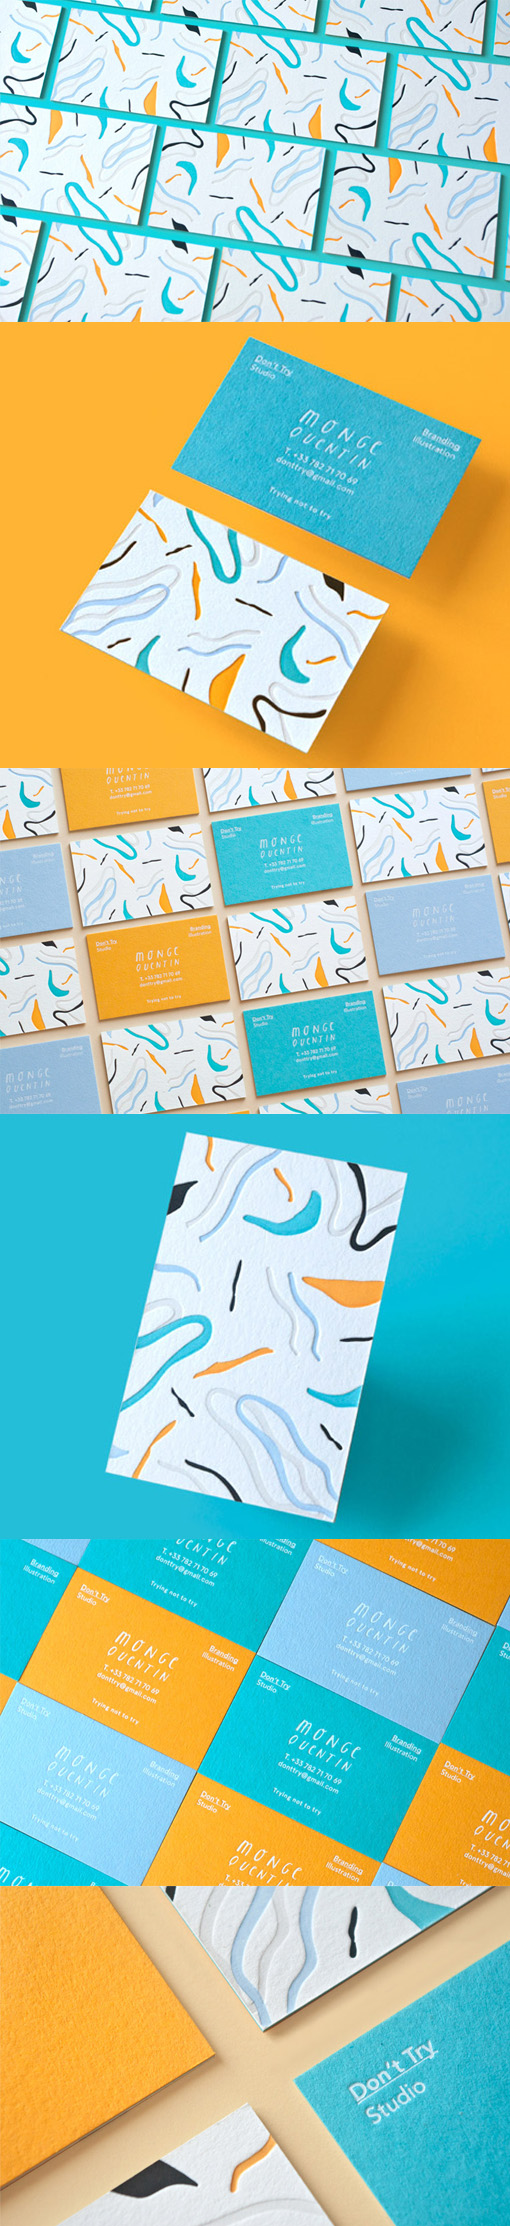 Playful And Bright Textured Letterpress Business Card For A Designer